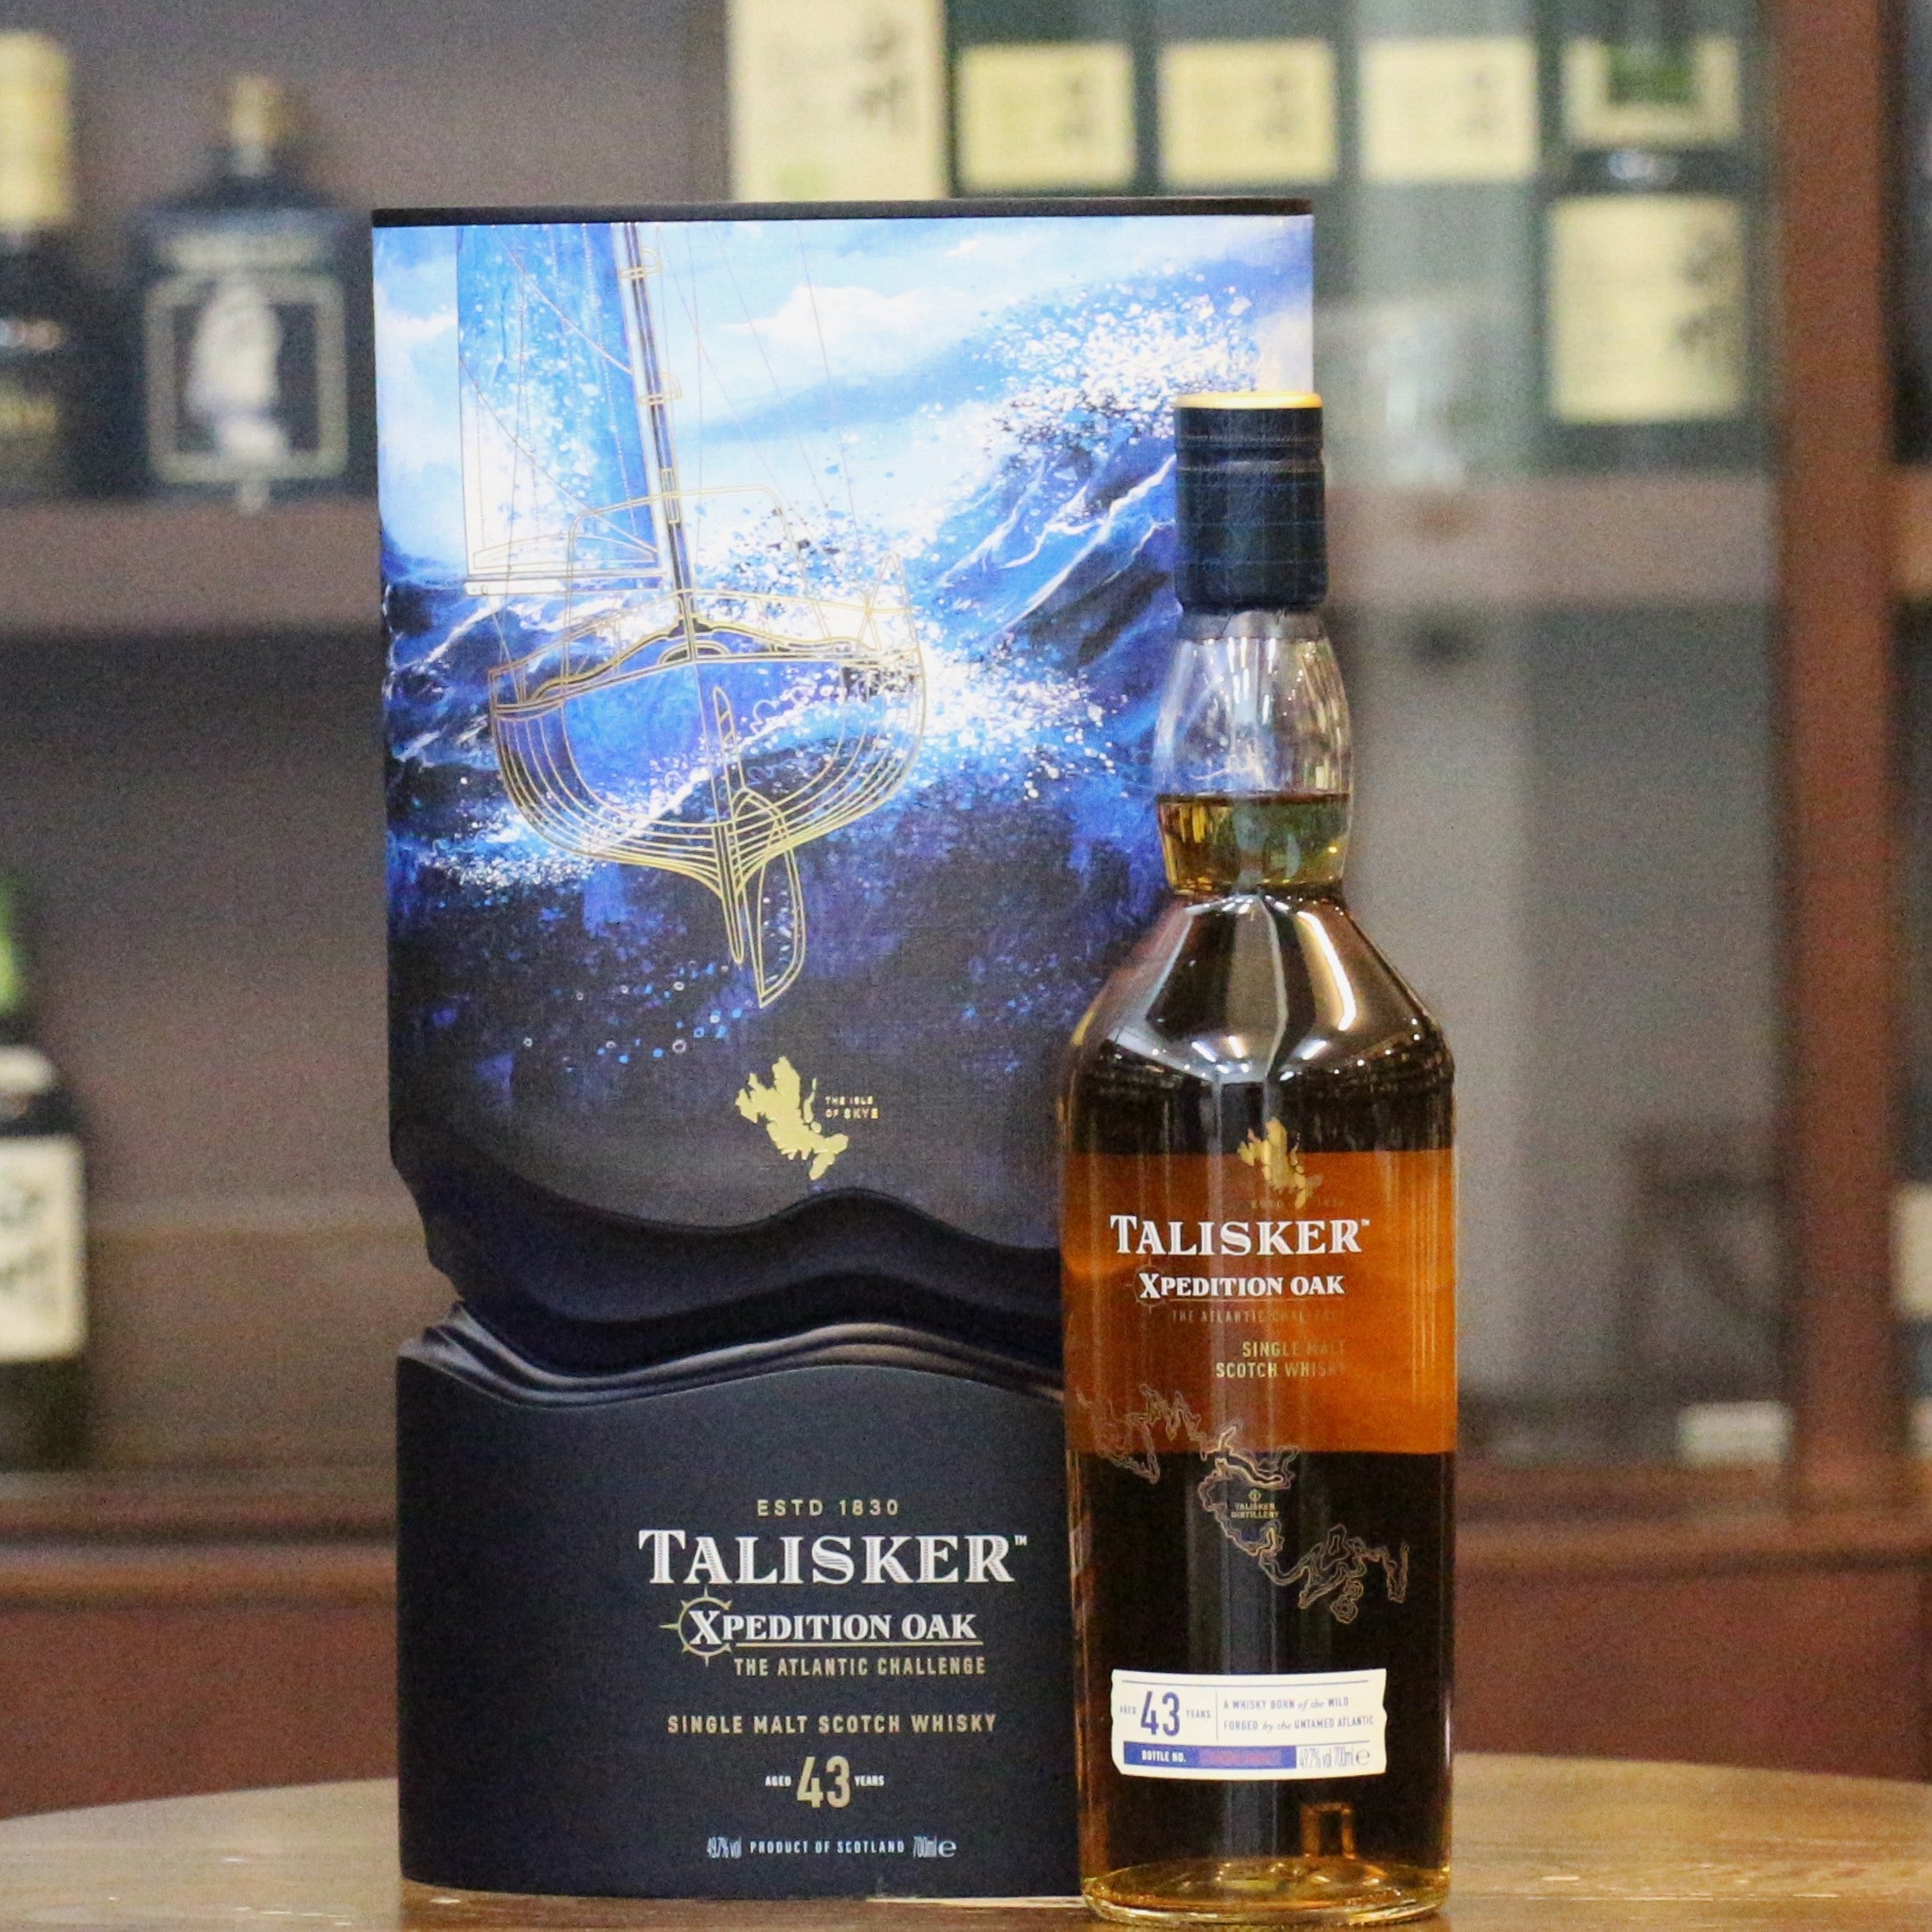 Talisker’s Xpedition Oak shows the signature peppery sea salt smoky sweetness of the brand, having been nurtured in oak for more than four decades.